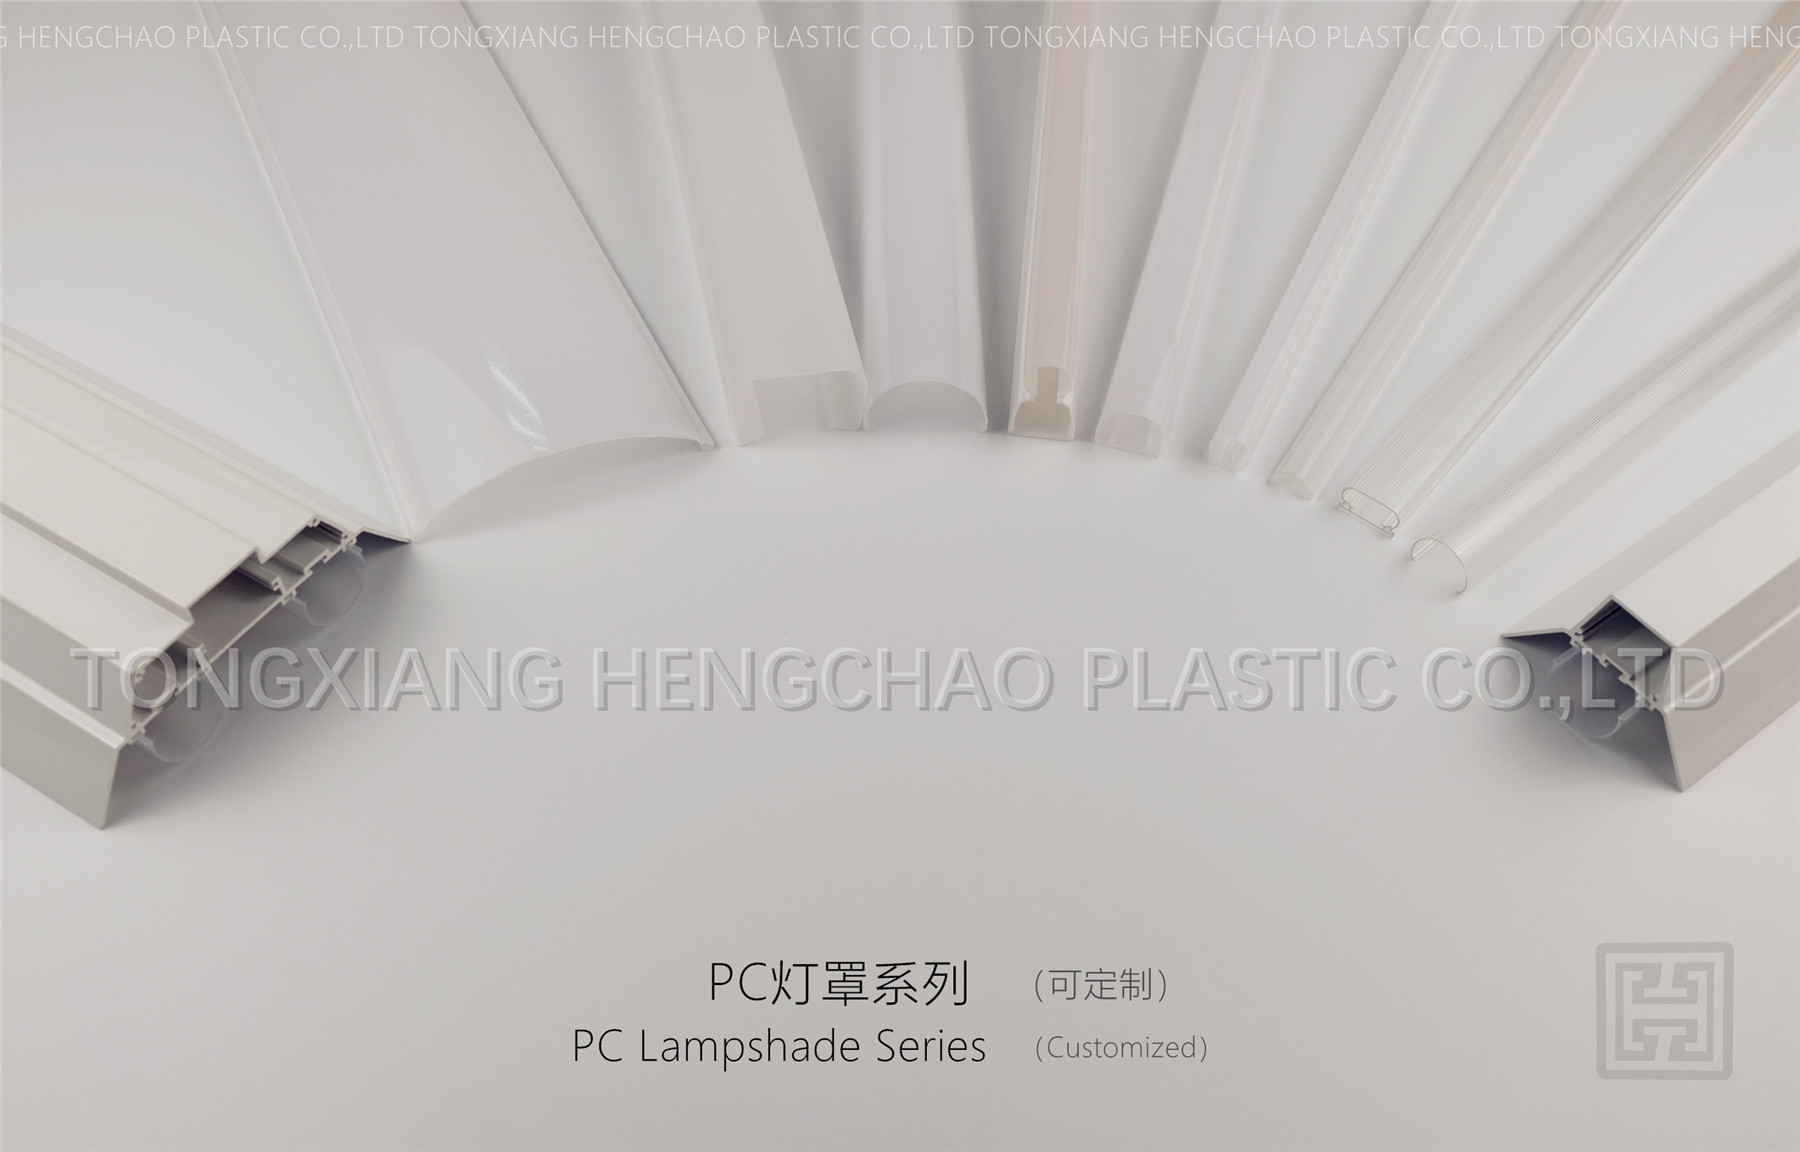 Quality Rigid Plastic Extrusion Profiles For LED Diffuser / Lampshade / Light Cover for sale